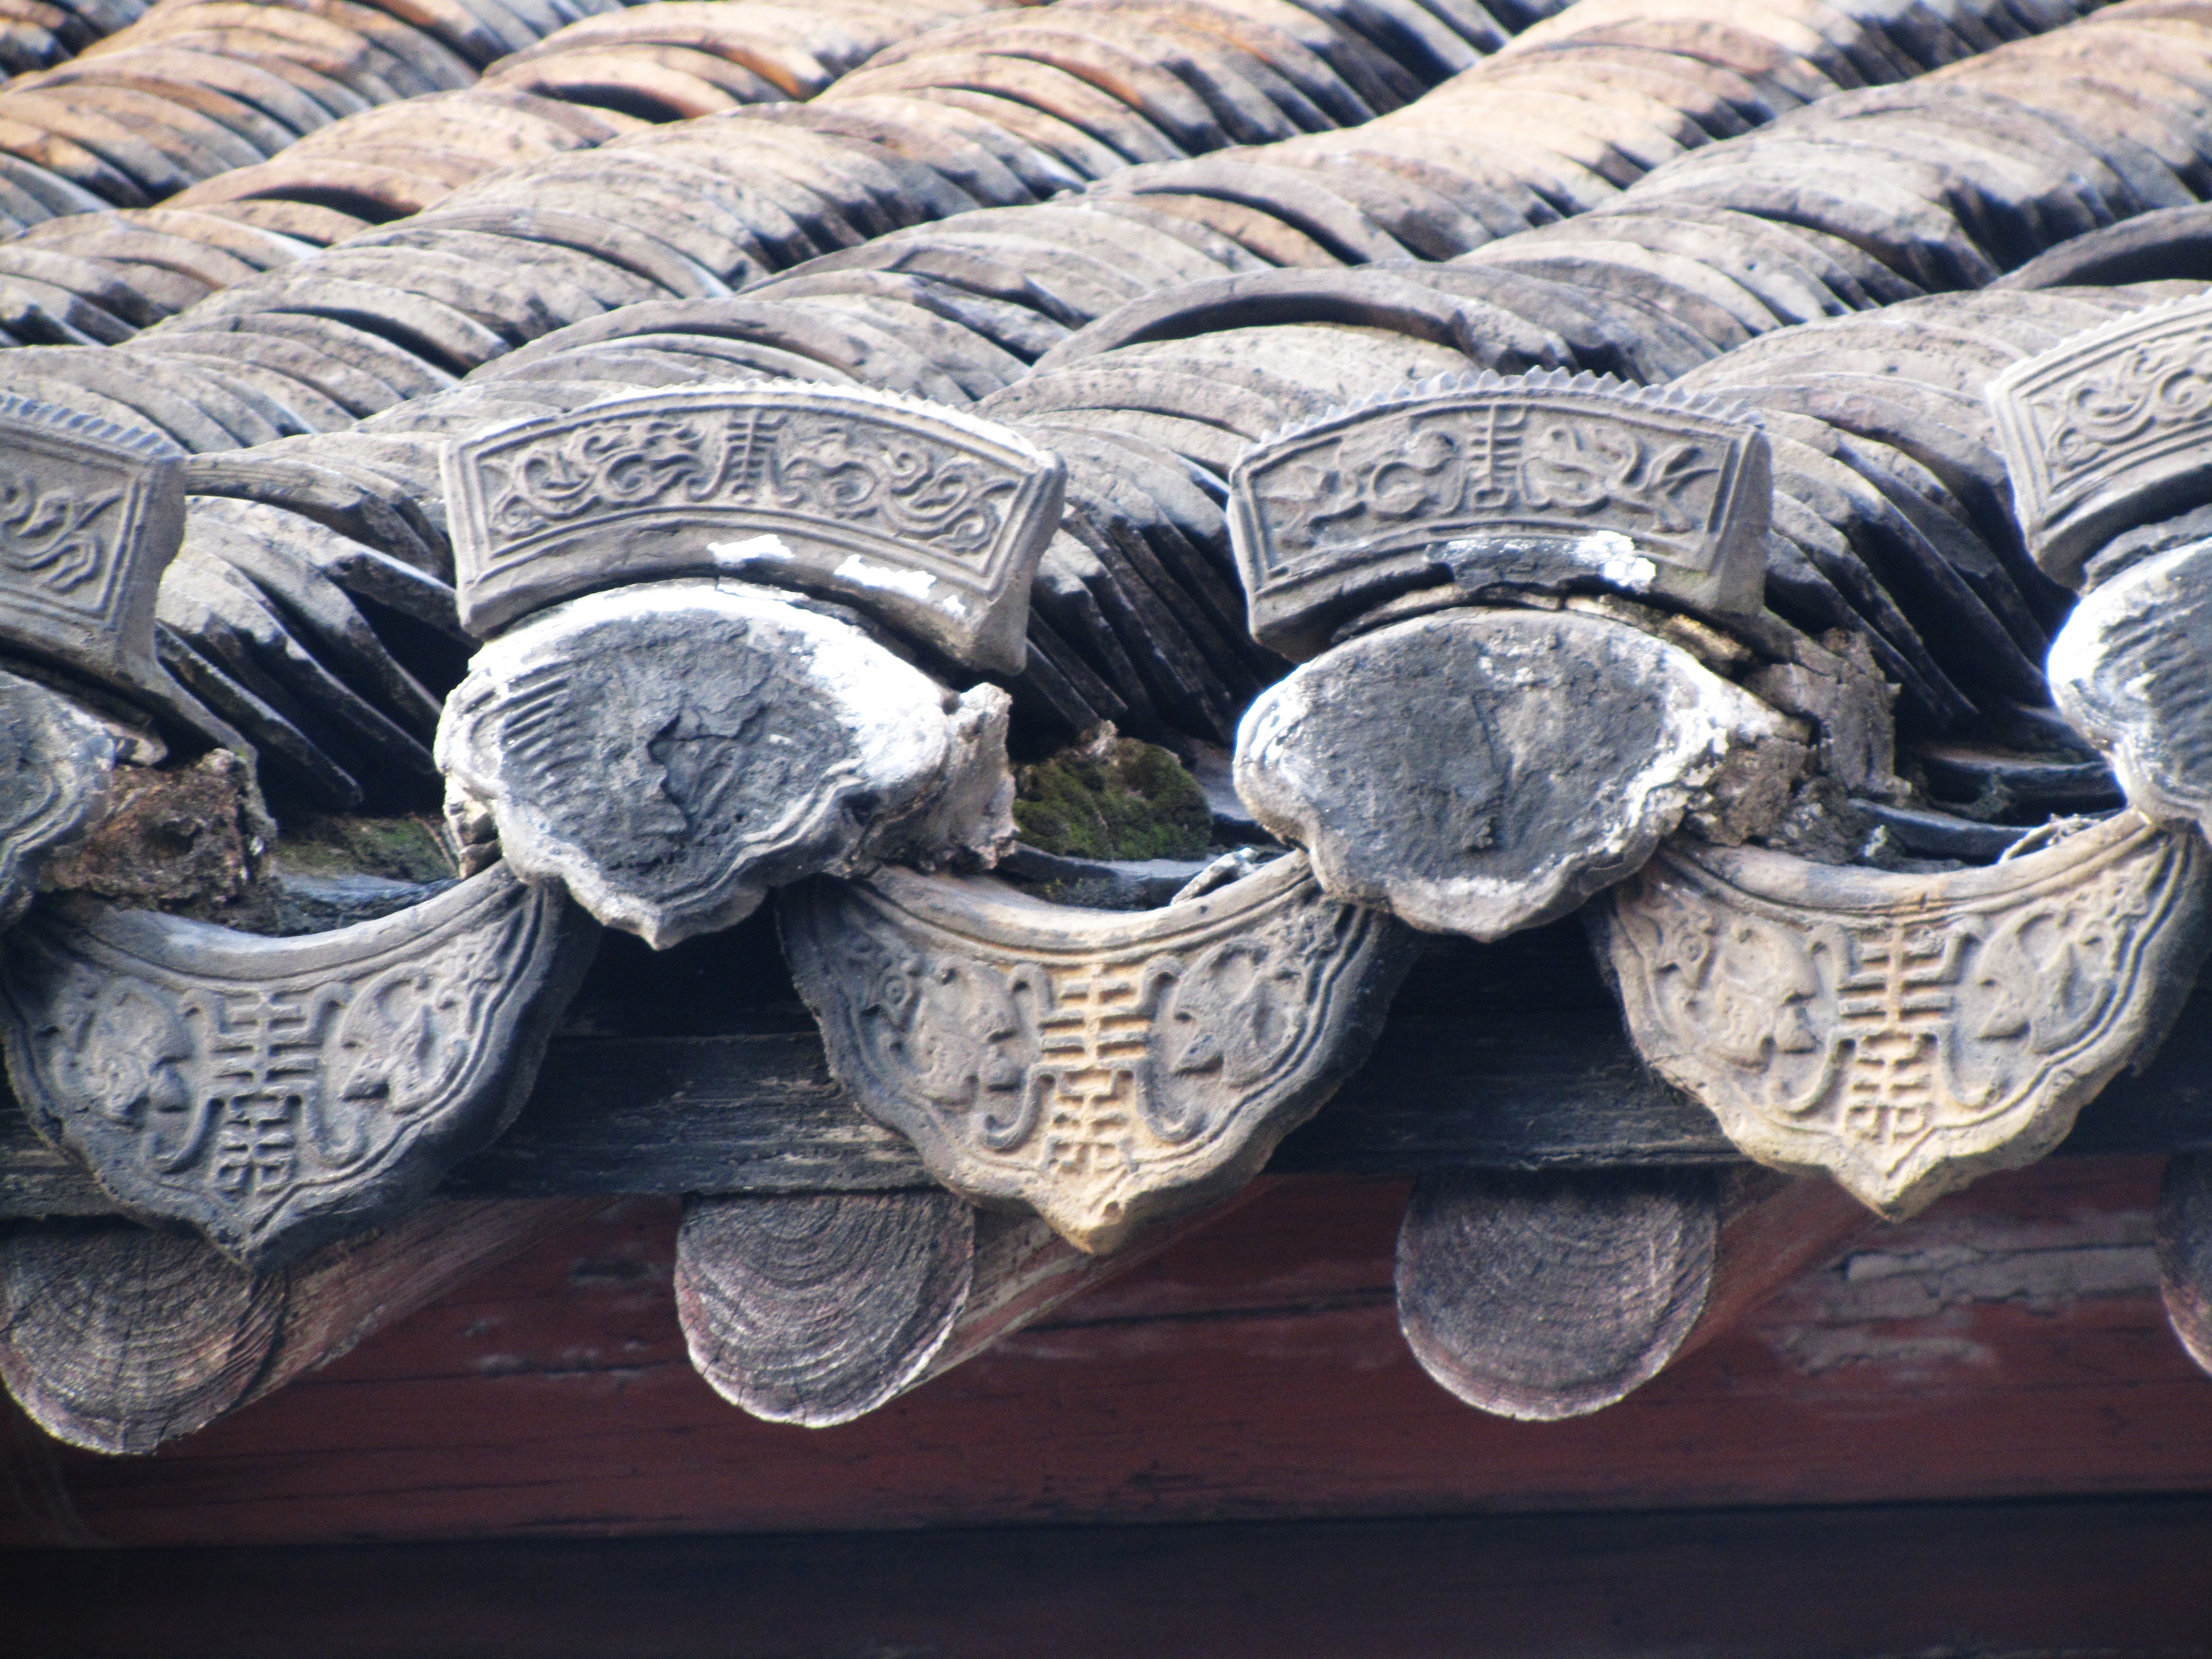 Overlapping glazed roof tiles with inscribed characters.